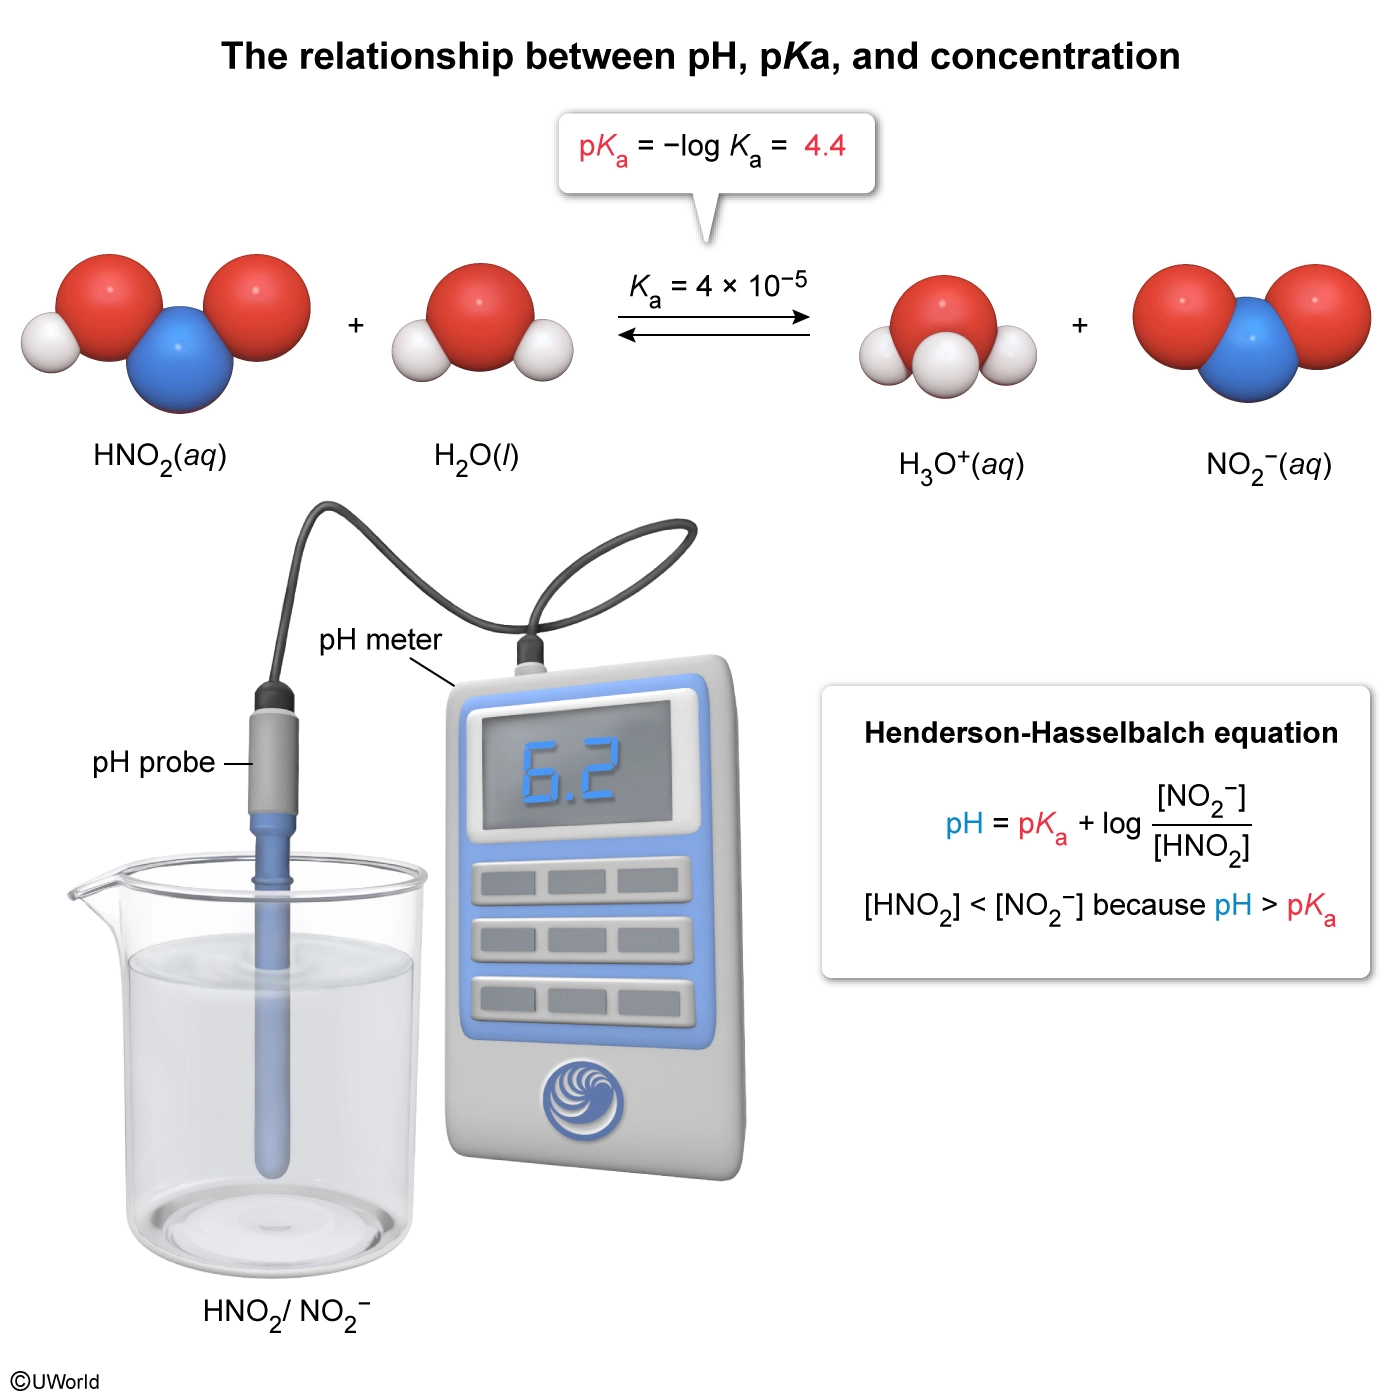 The relationship between pH, pKa, and concentration